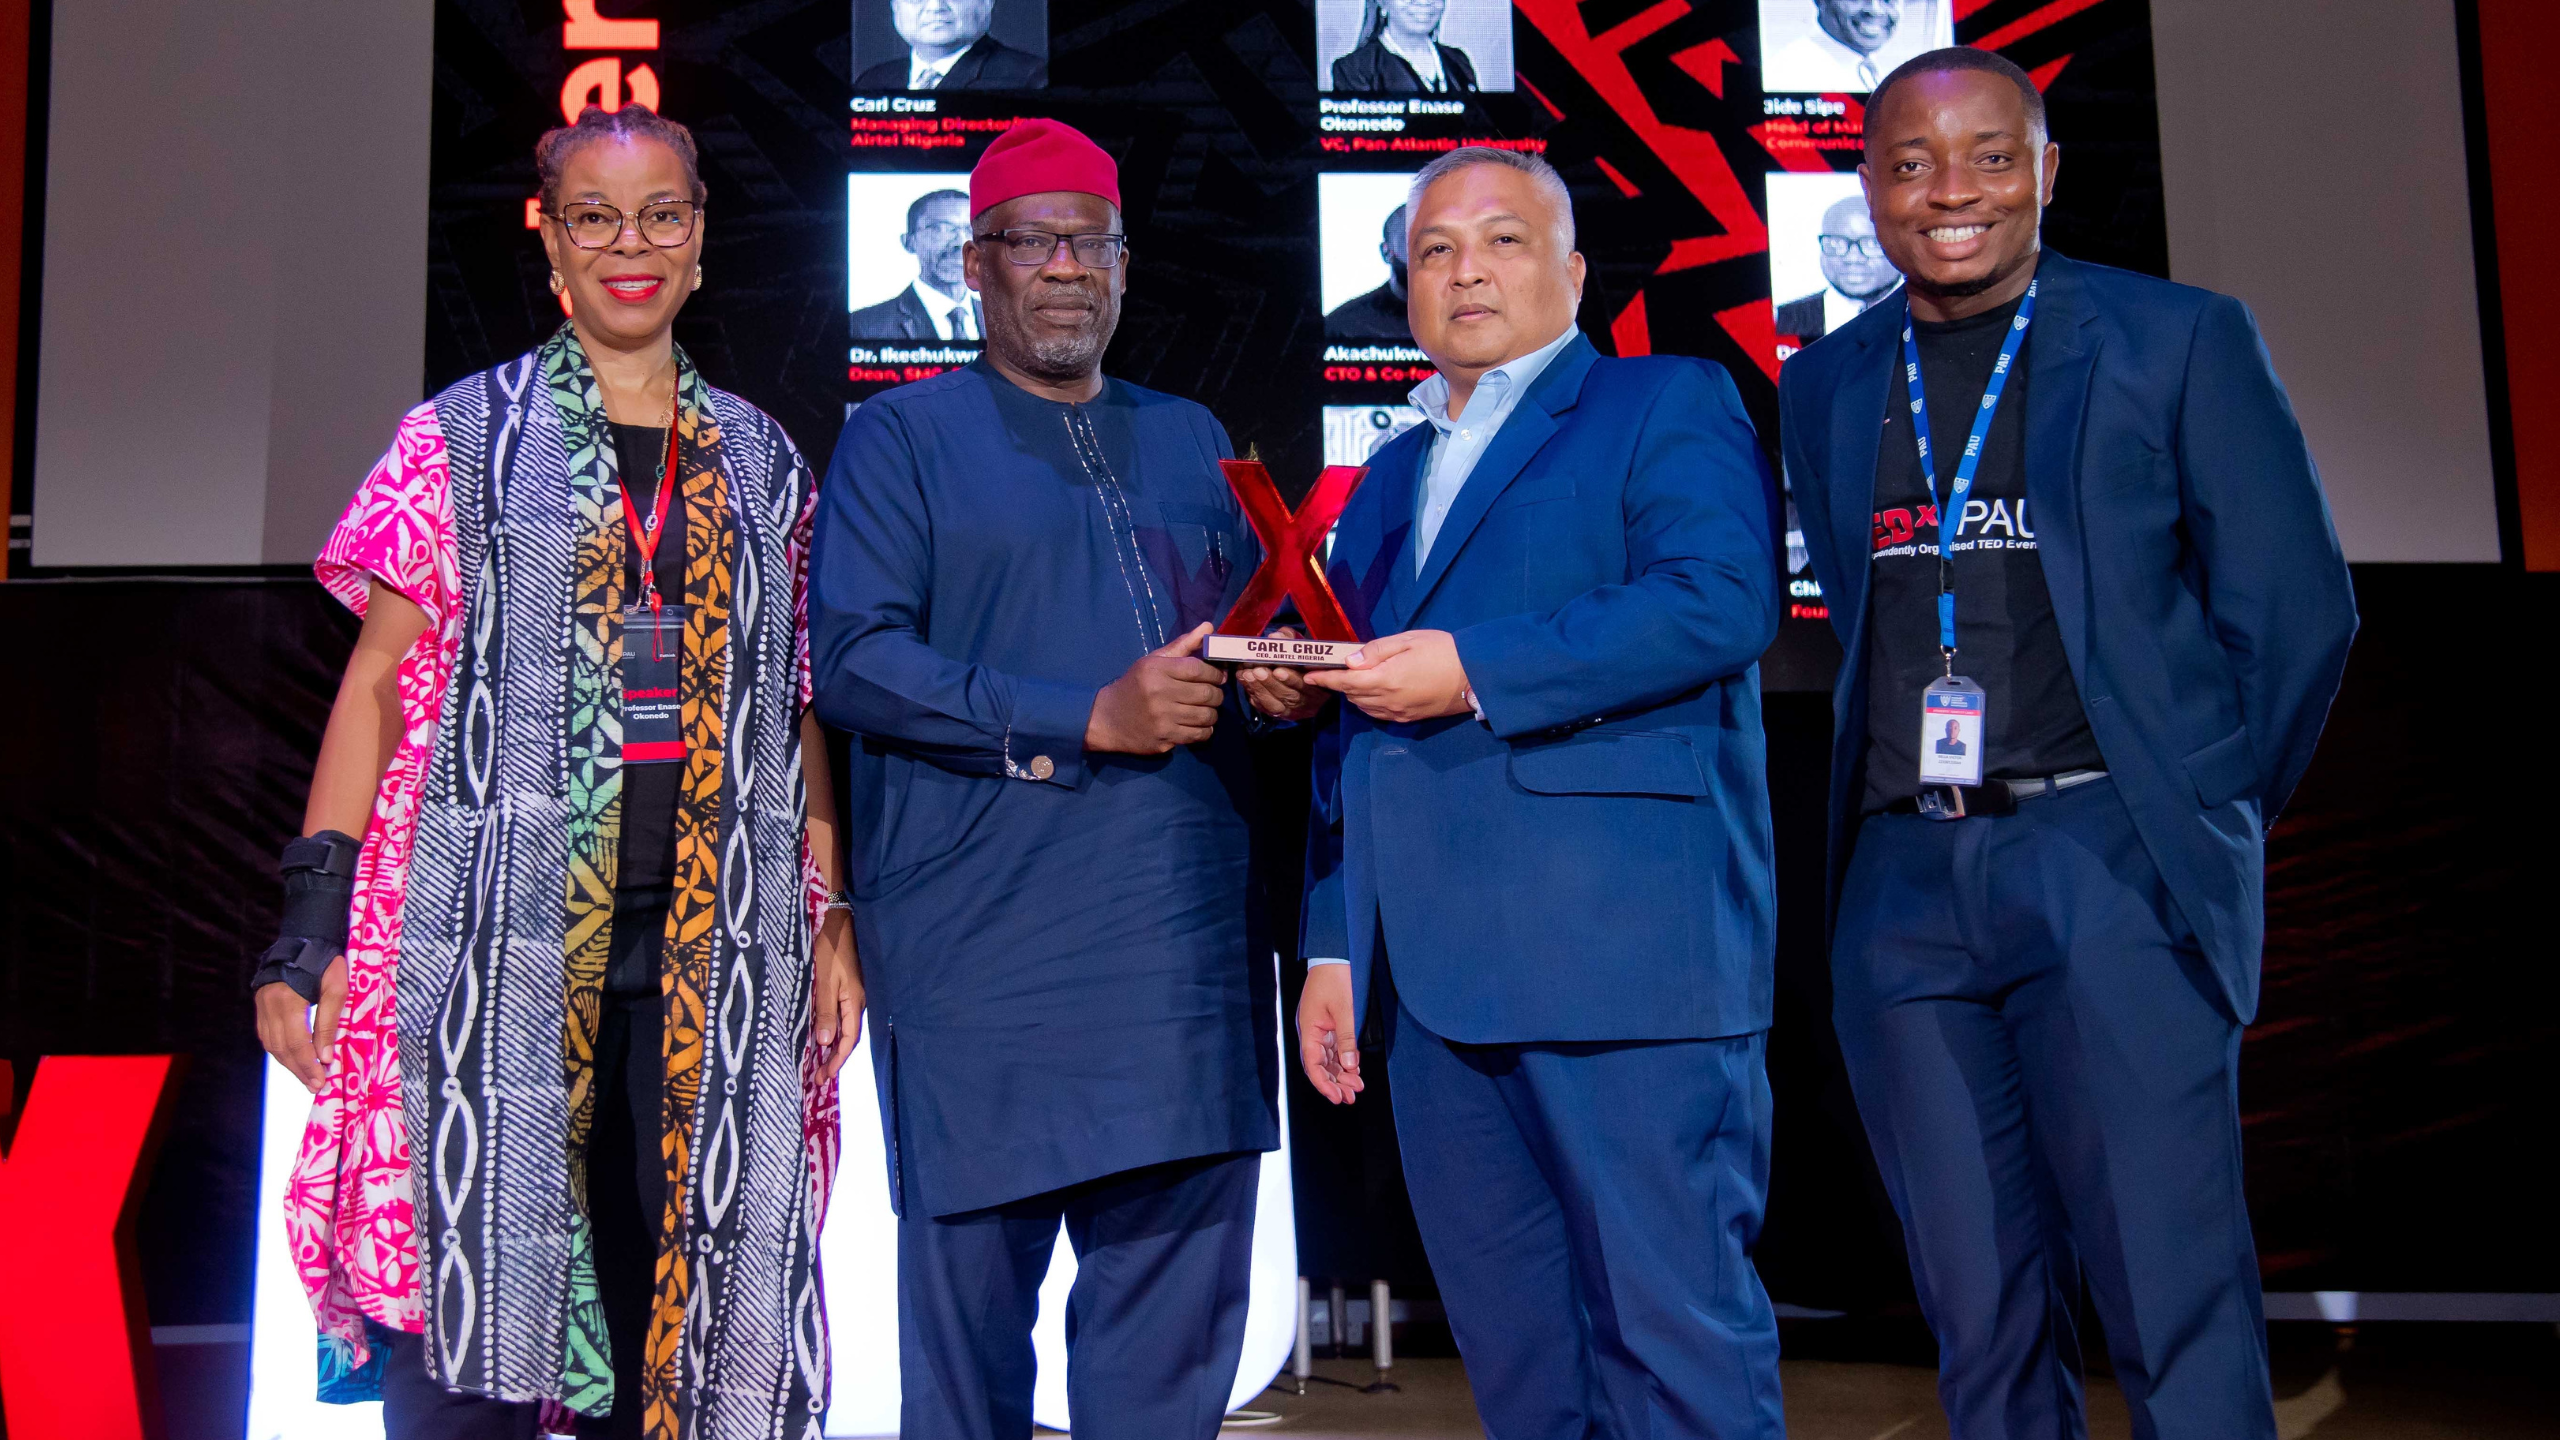 Telecom is Transforming Every Facet of Business and Life in Nigeria, Says Airtel CEO